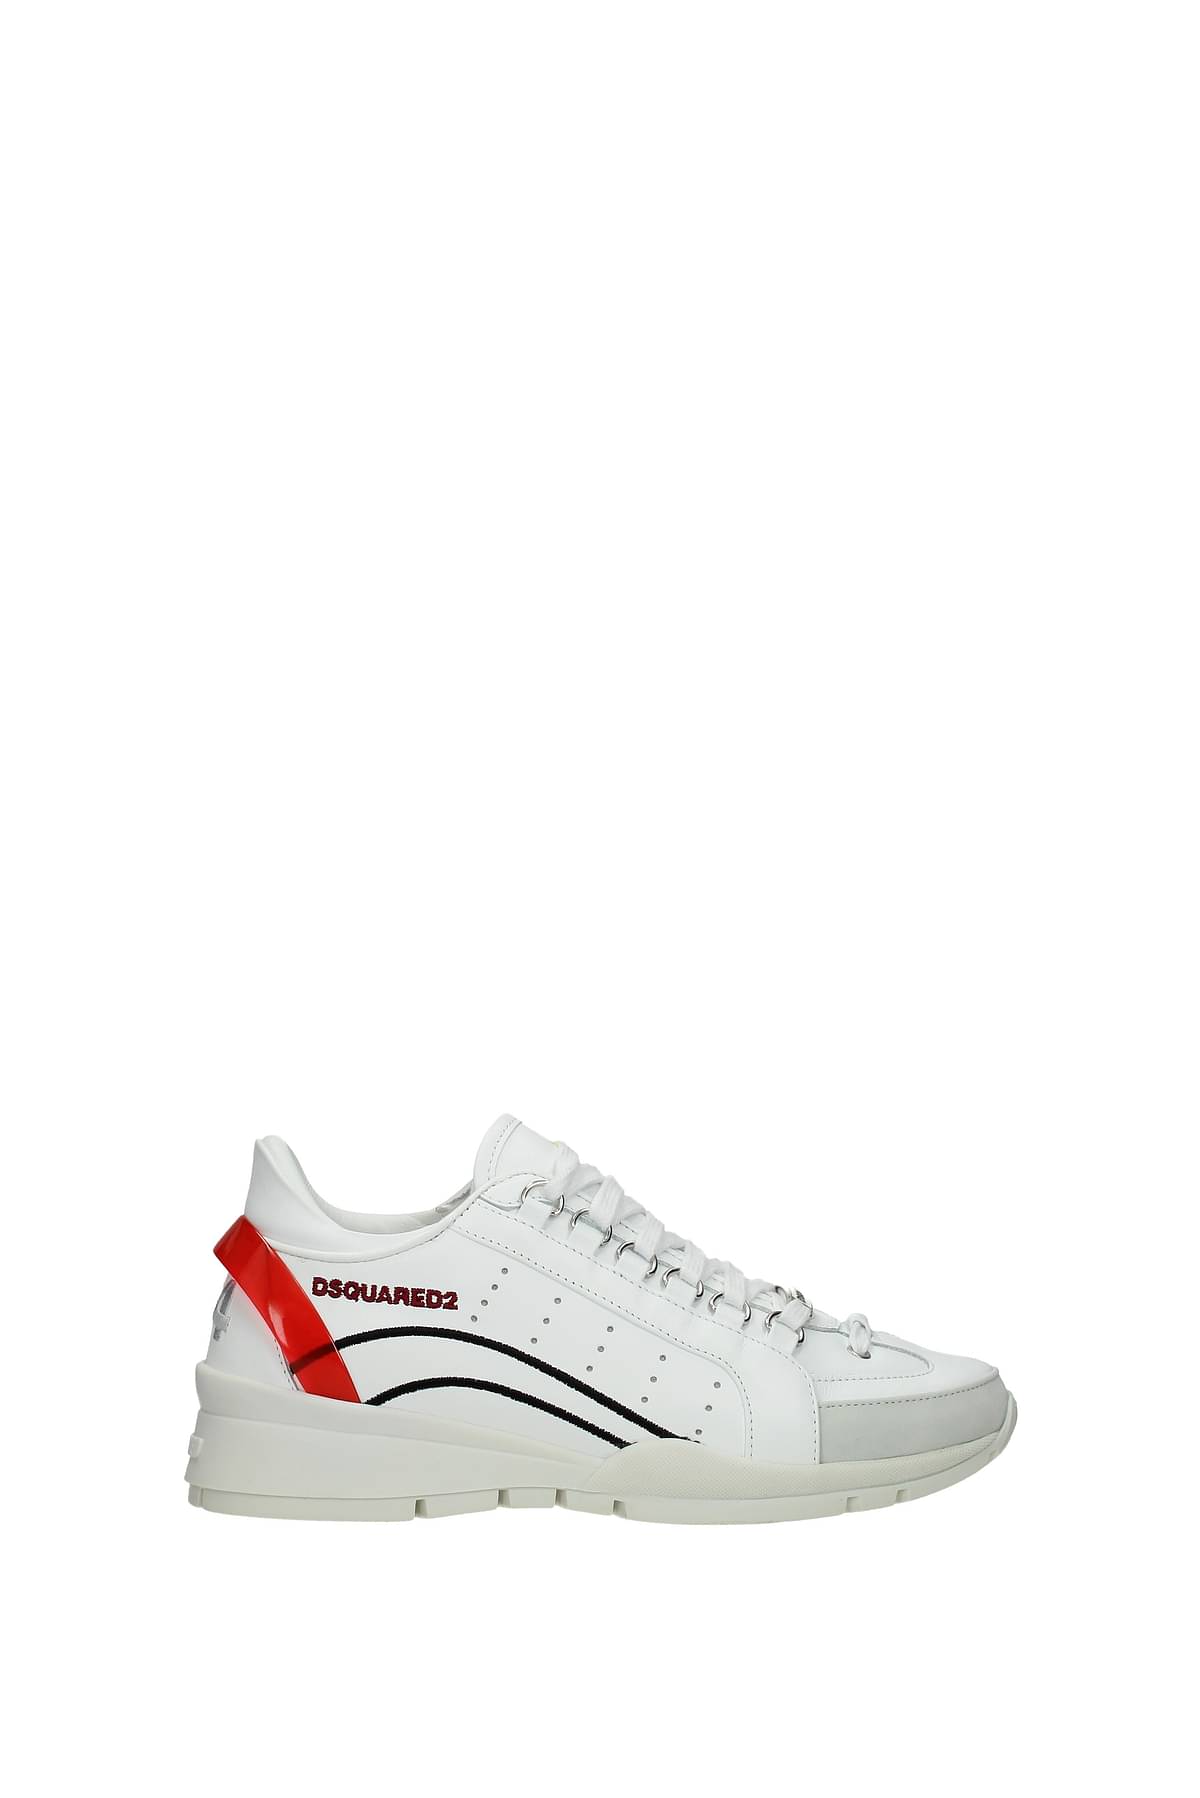 pijn Vel legaal Dsquared2 Sneakers Women SNW011501503797M330 Leather 207,38€